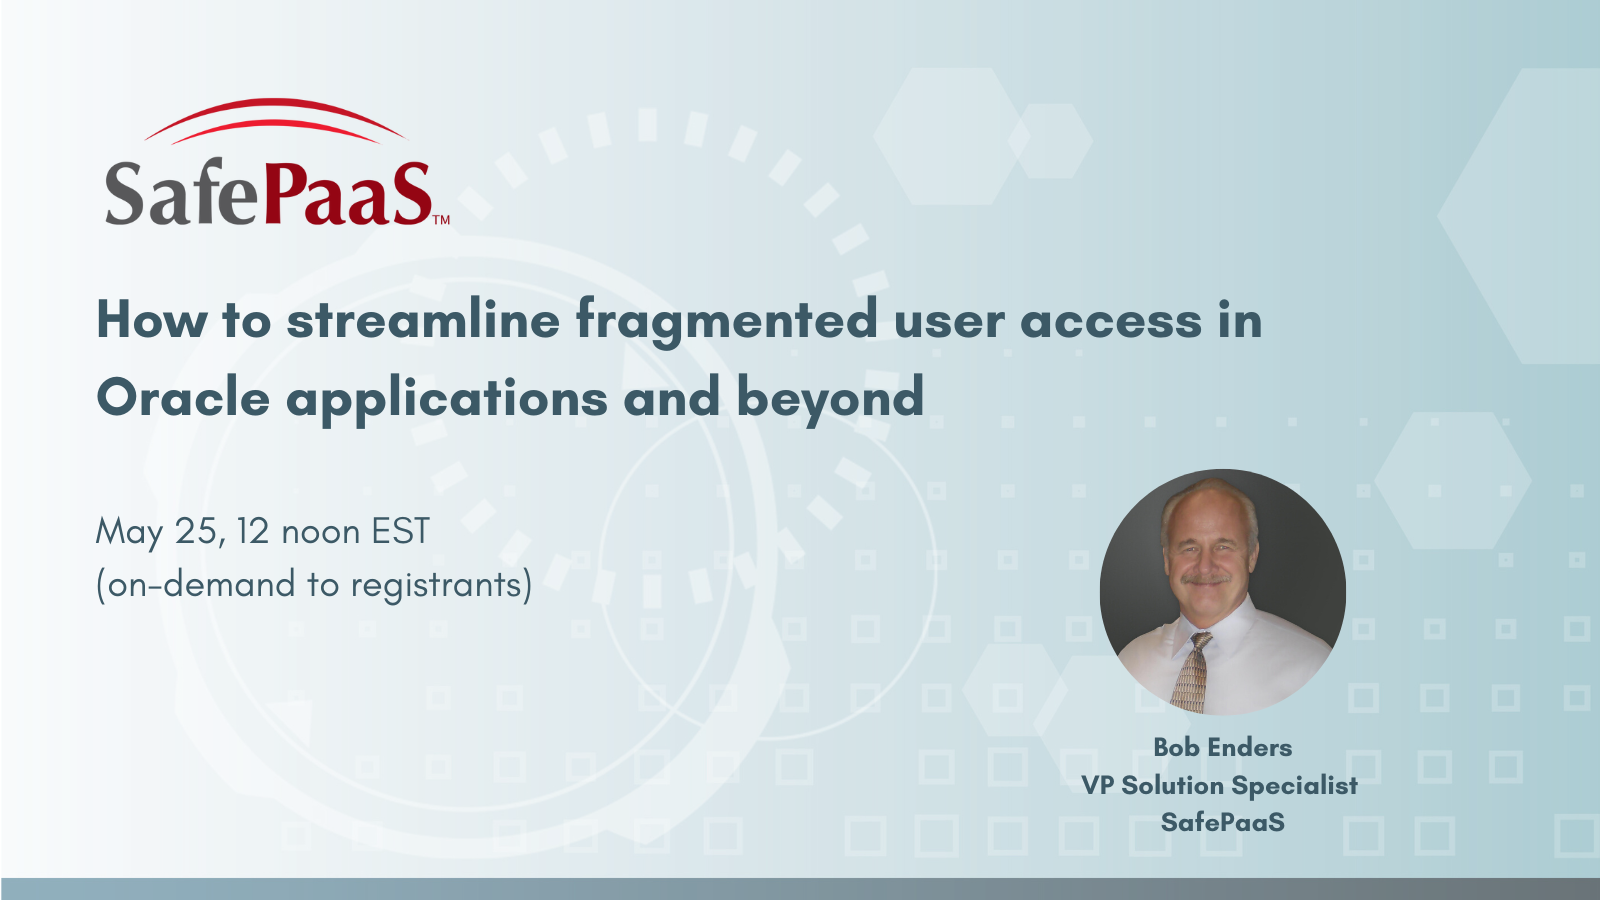 Streamline access in Oracle